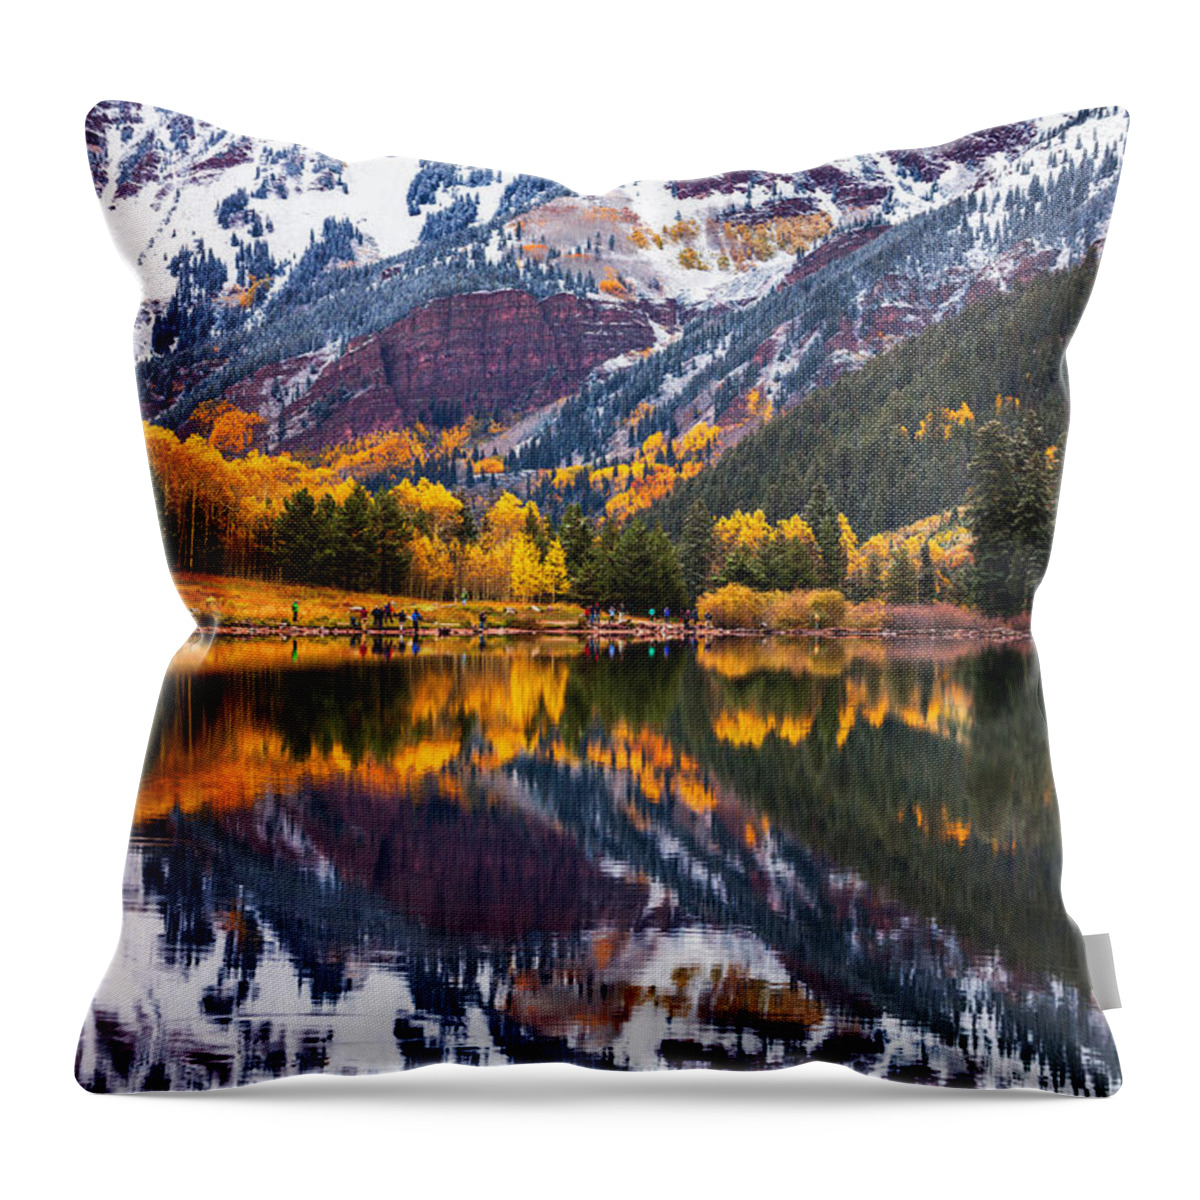 Snow Throw Pillow featuring the photograph Maroon Lake Backside by Darren White